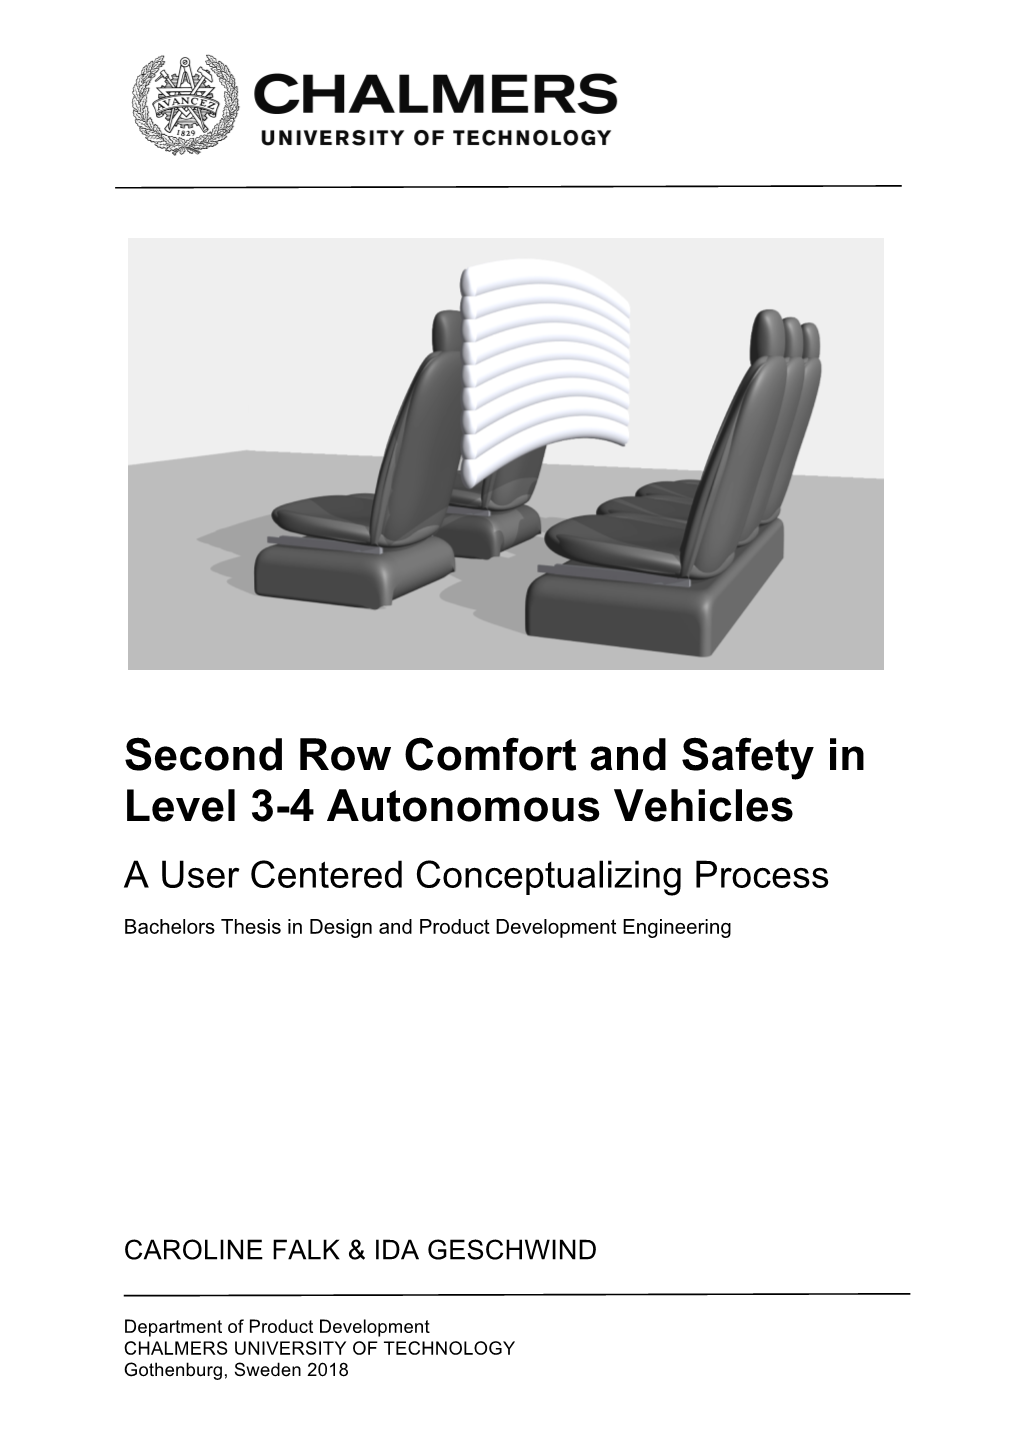 SECOND ROW COMFORT and SAFETY in LEVEL 3-4 AUTONOMOUS VEHICLES a User Centered Conceptualizing Process